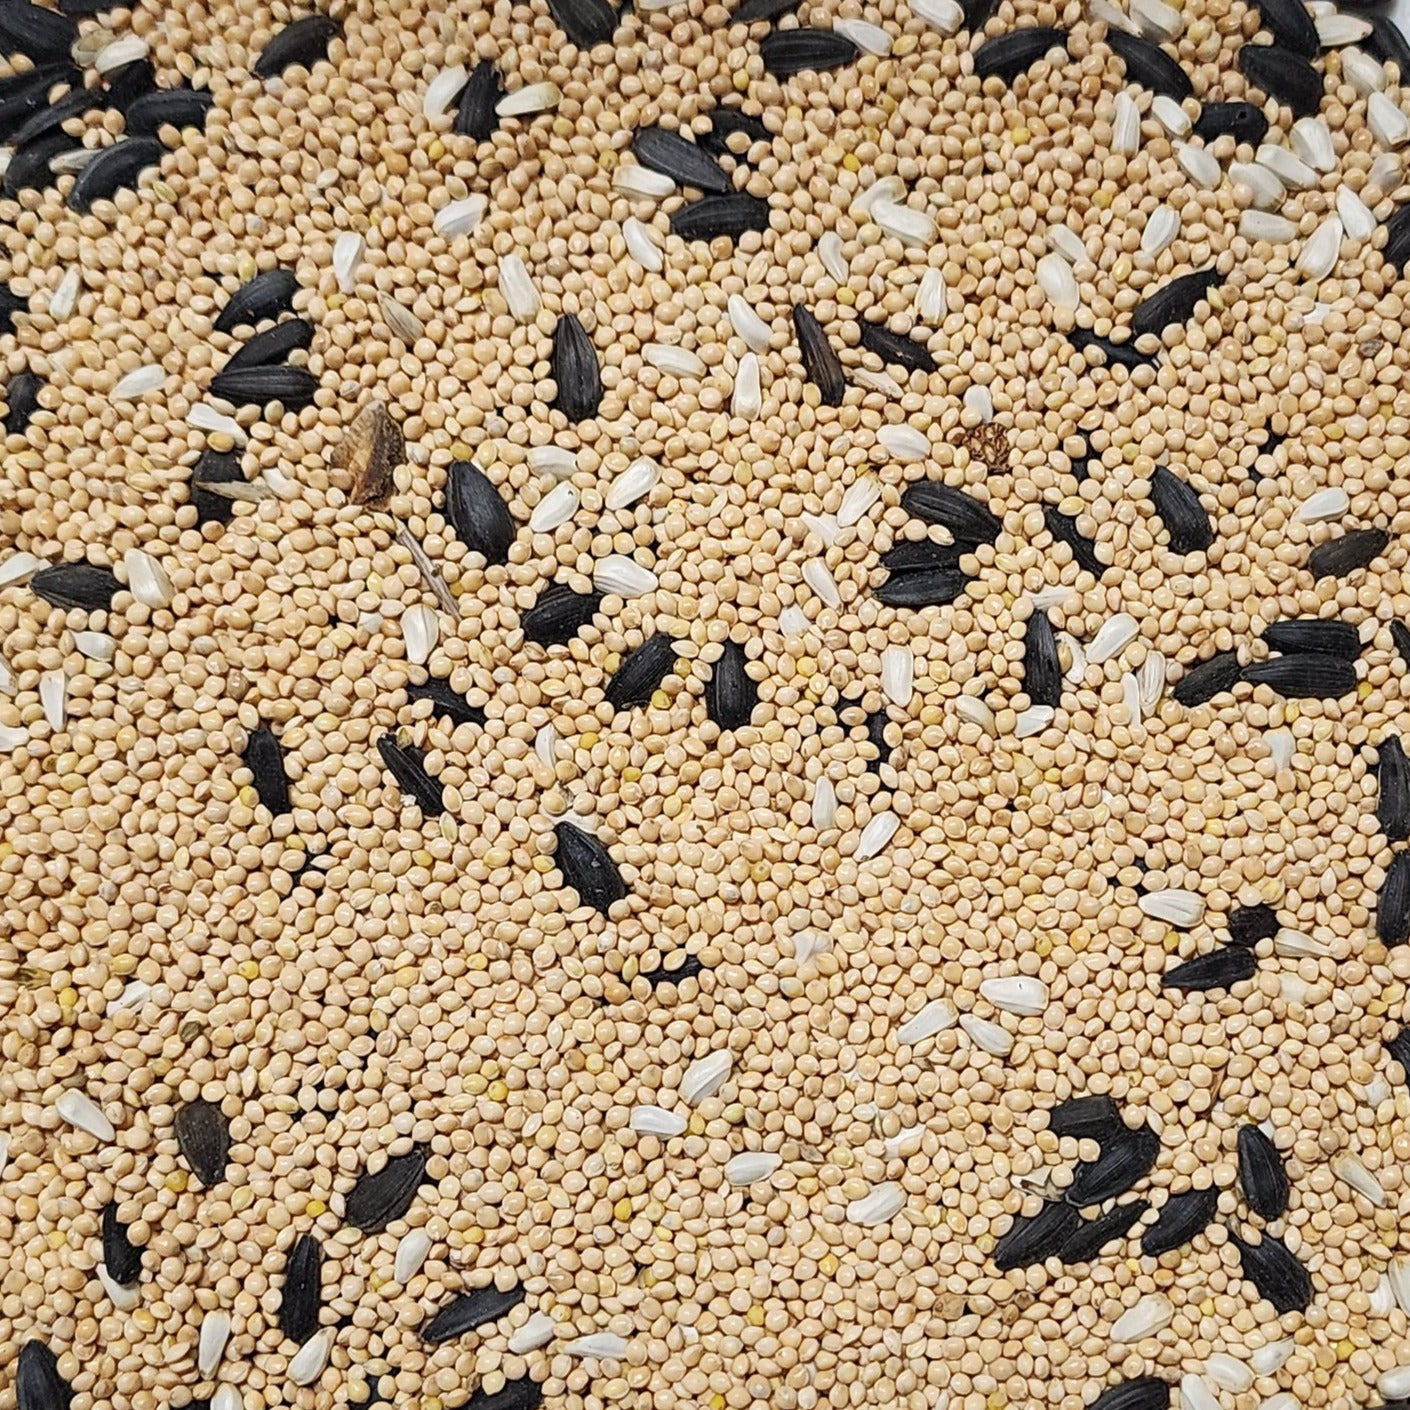 mixed bird seed with millet, sunflower and safflower seed